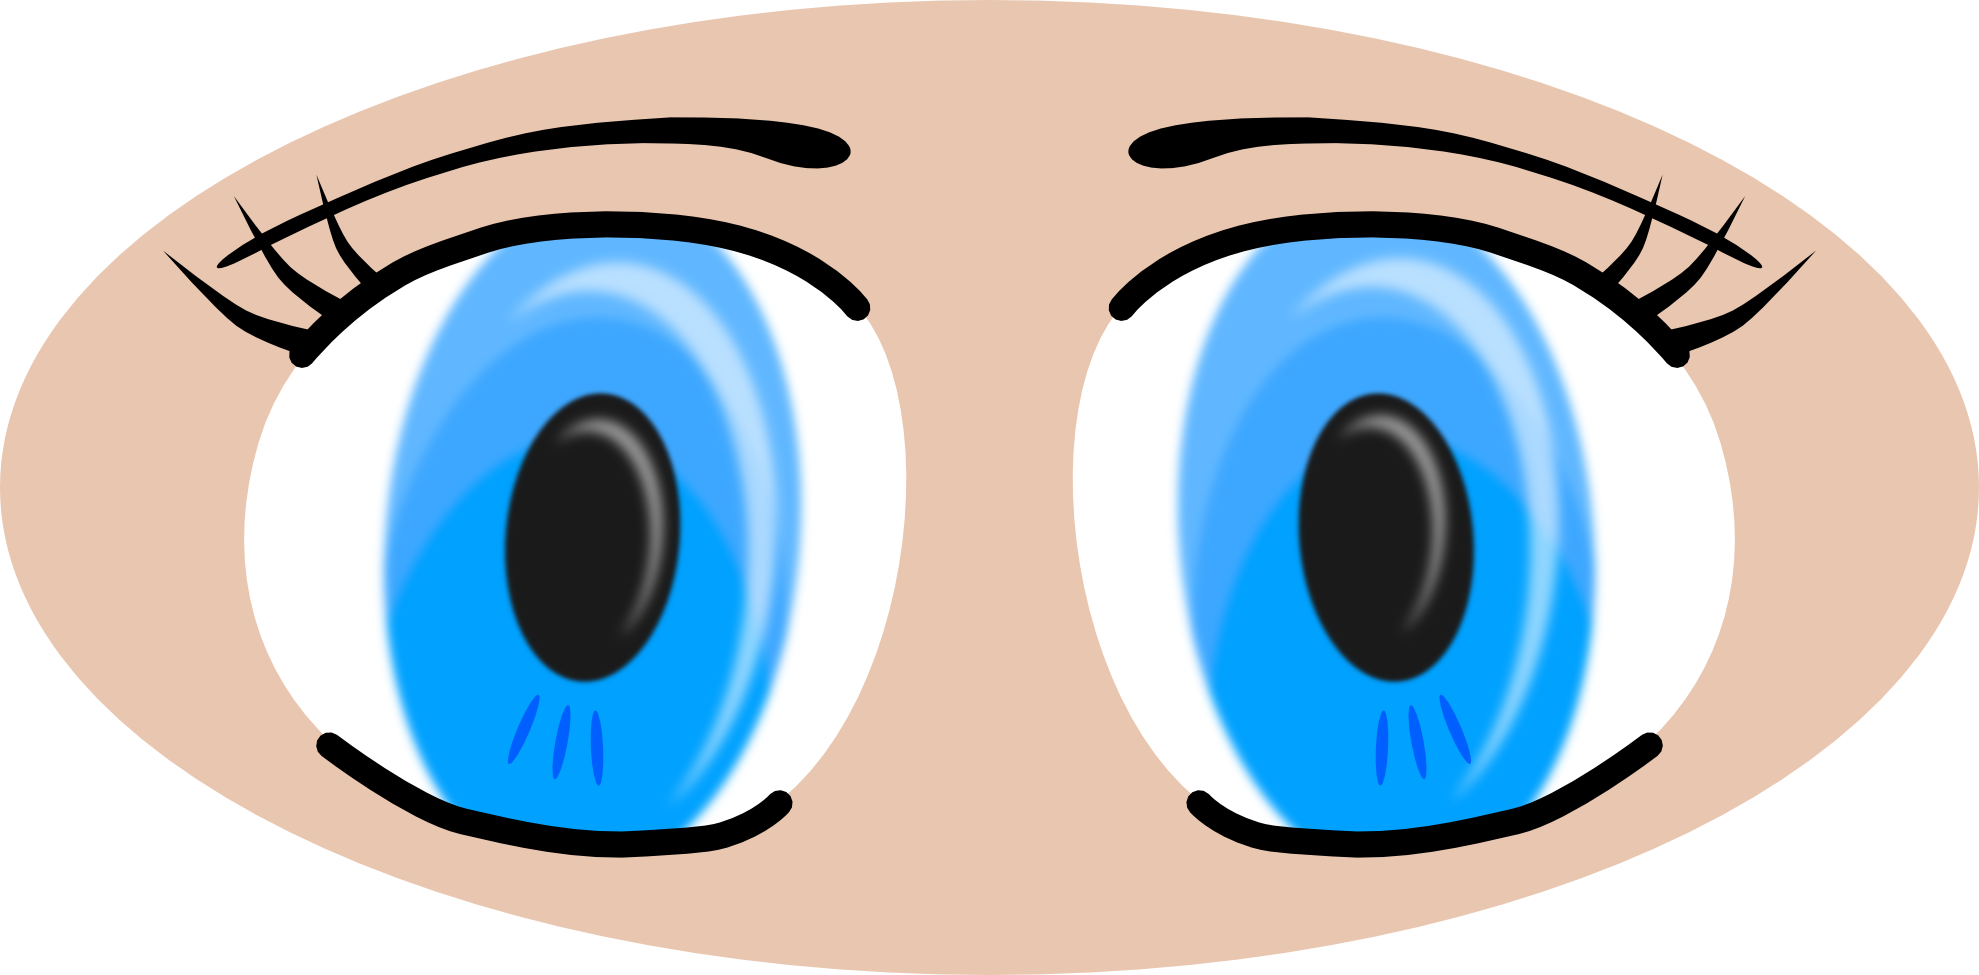 Eyeball Eye For You Image Download Png Clipart